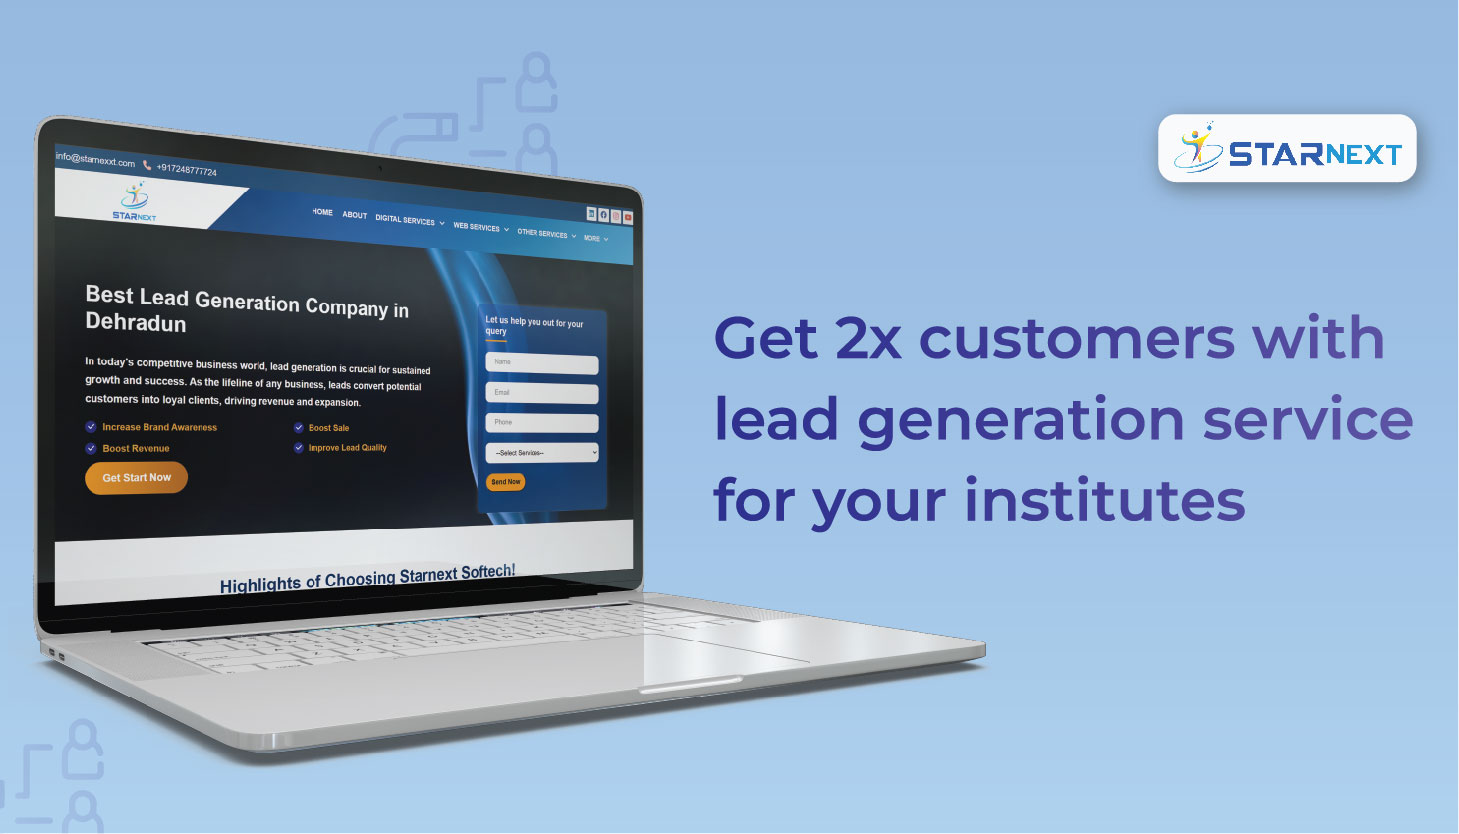 2x customers with lead generation service for your institute